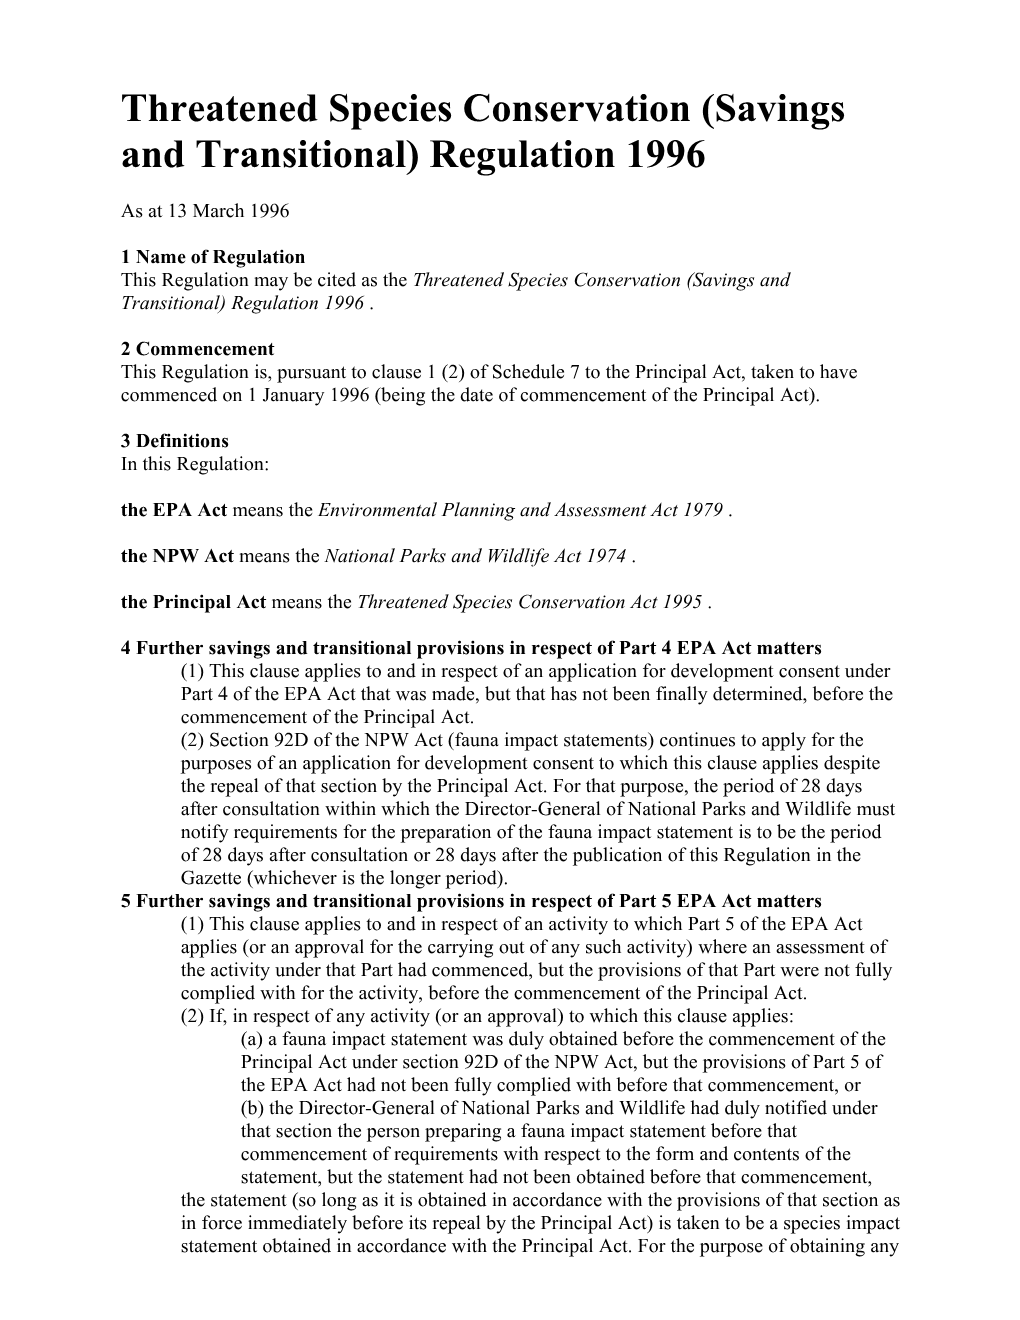 Threatened Species Conservation (Savings and Transitional) Regulation 1996